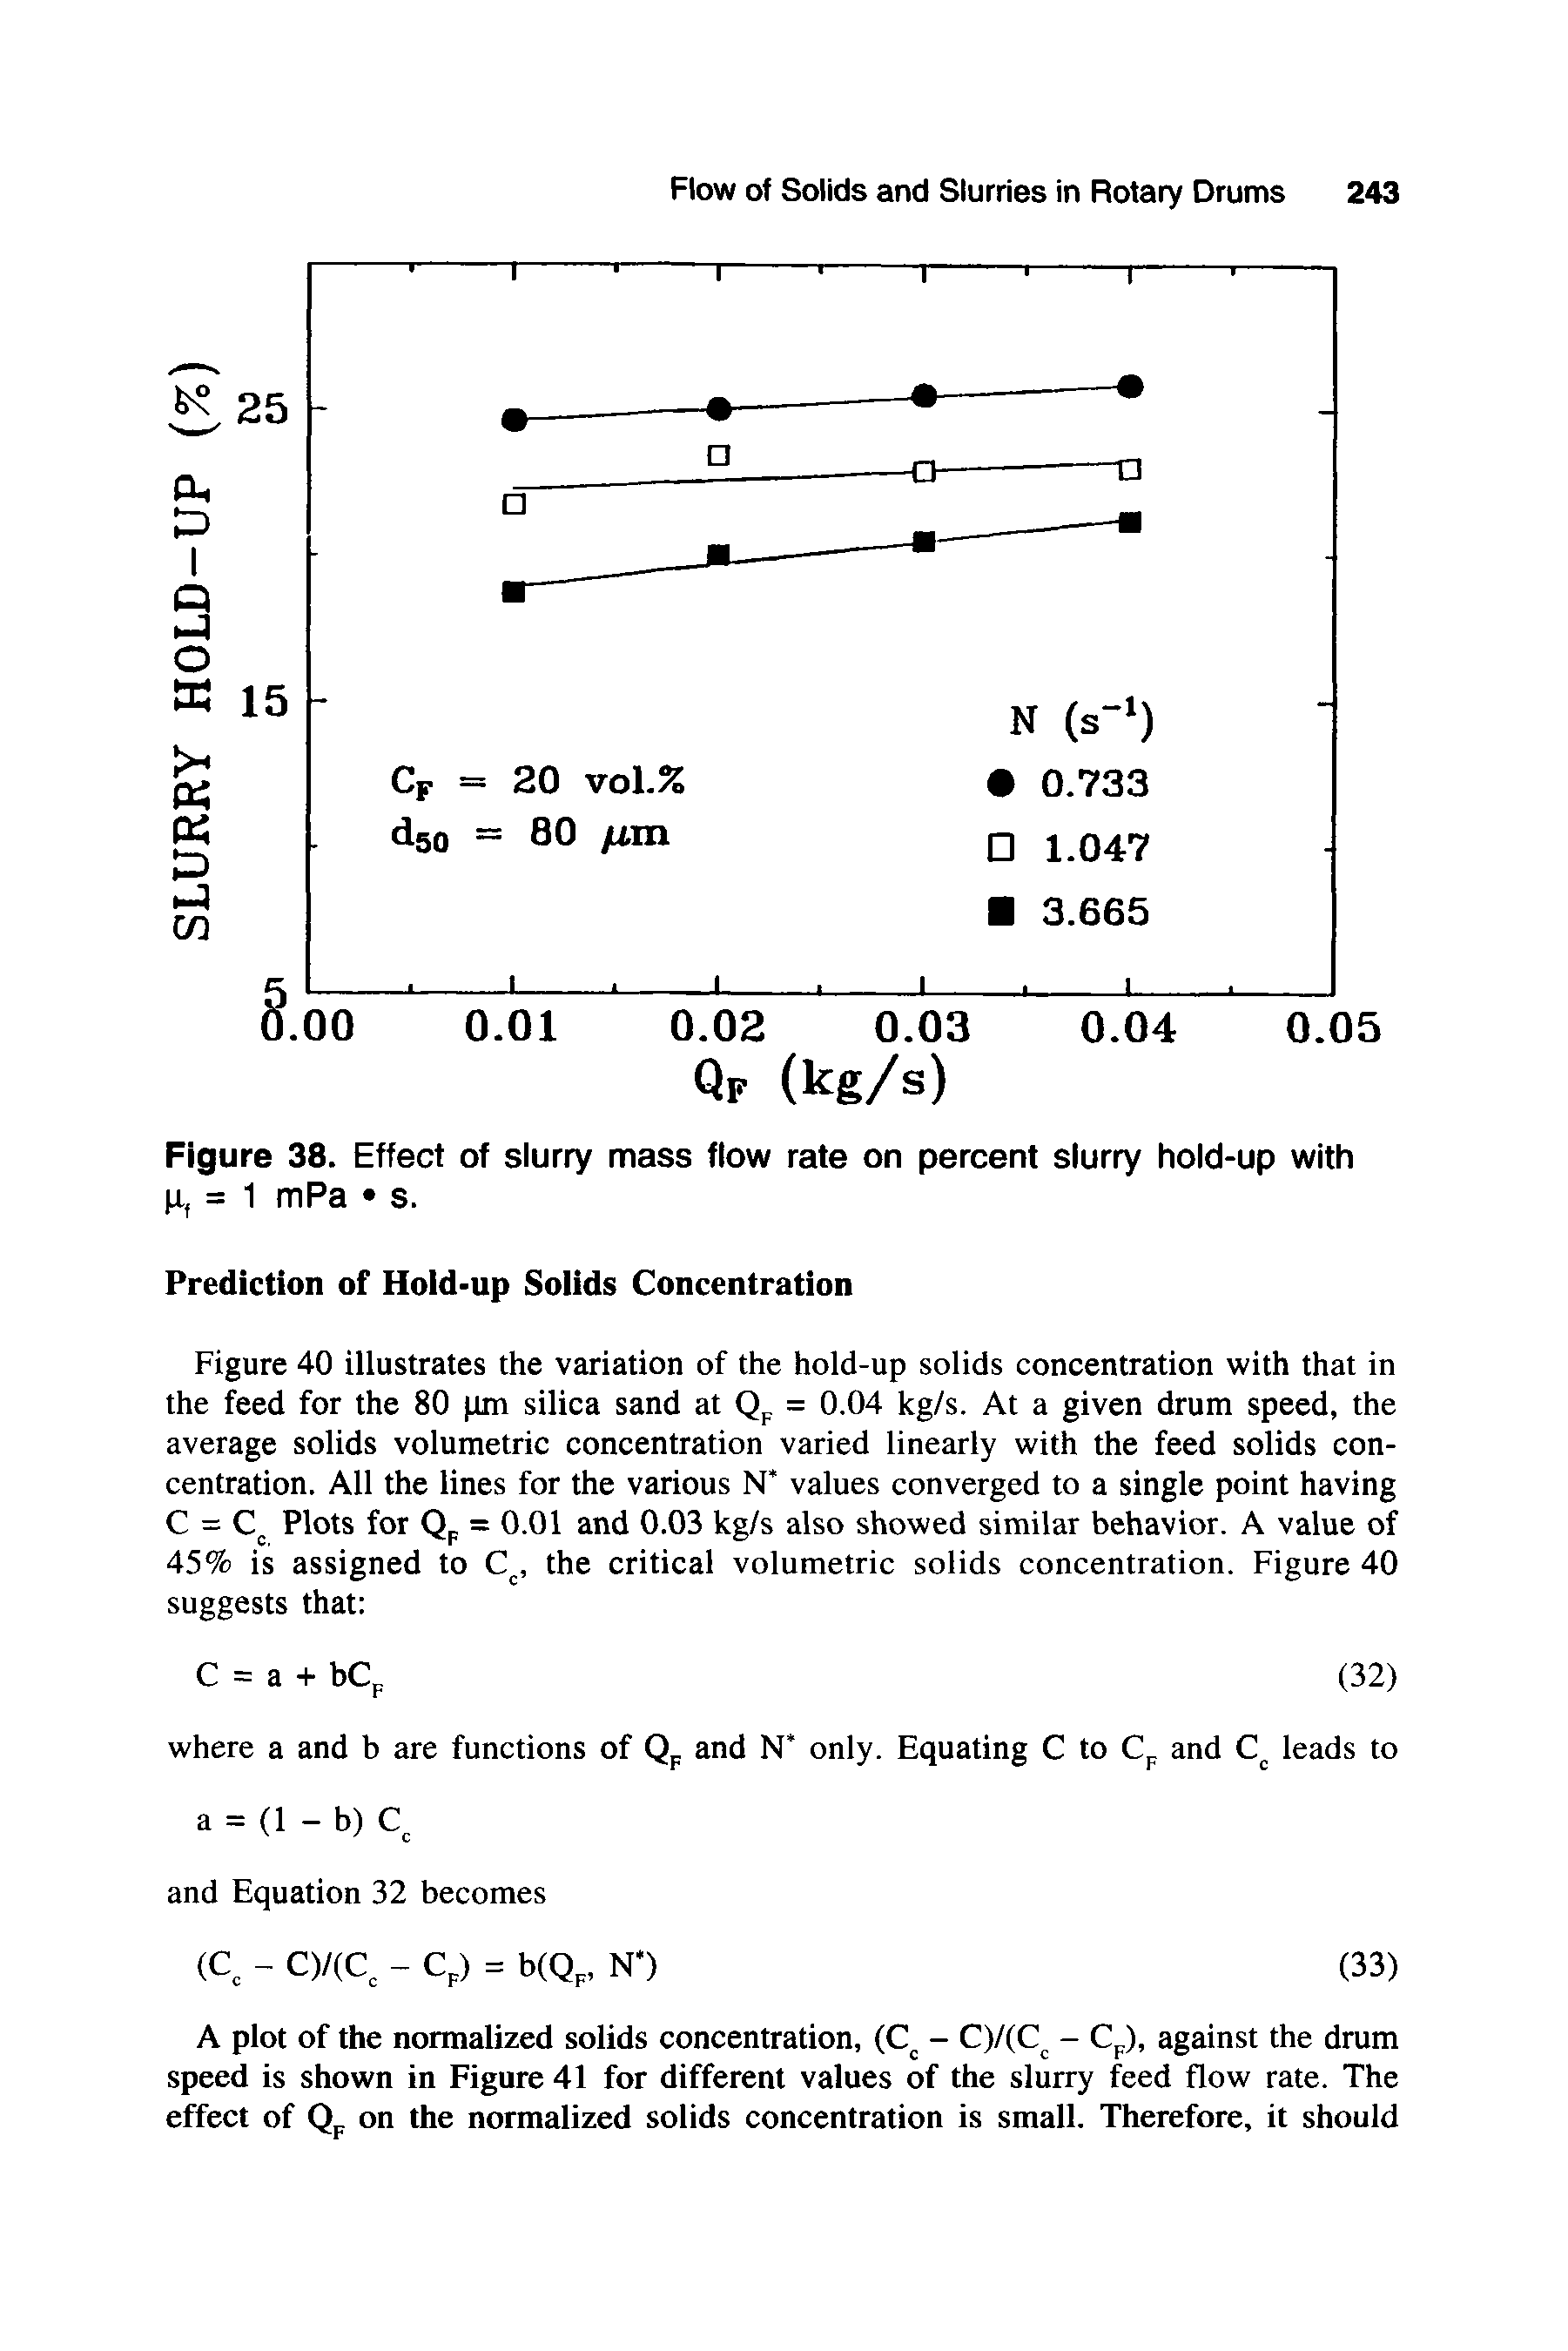 Figure 38. Effect of slurry mass flow rate on percent slurry hold-up with p, = 1 mPa s.